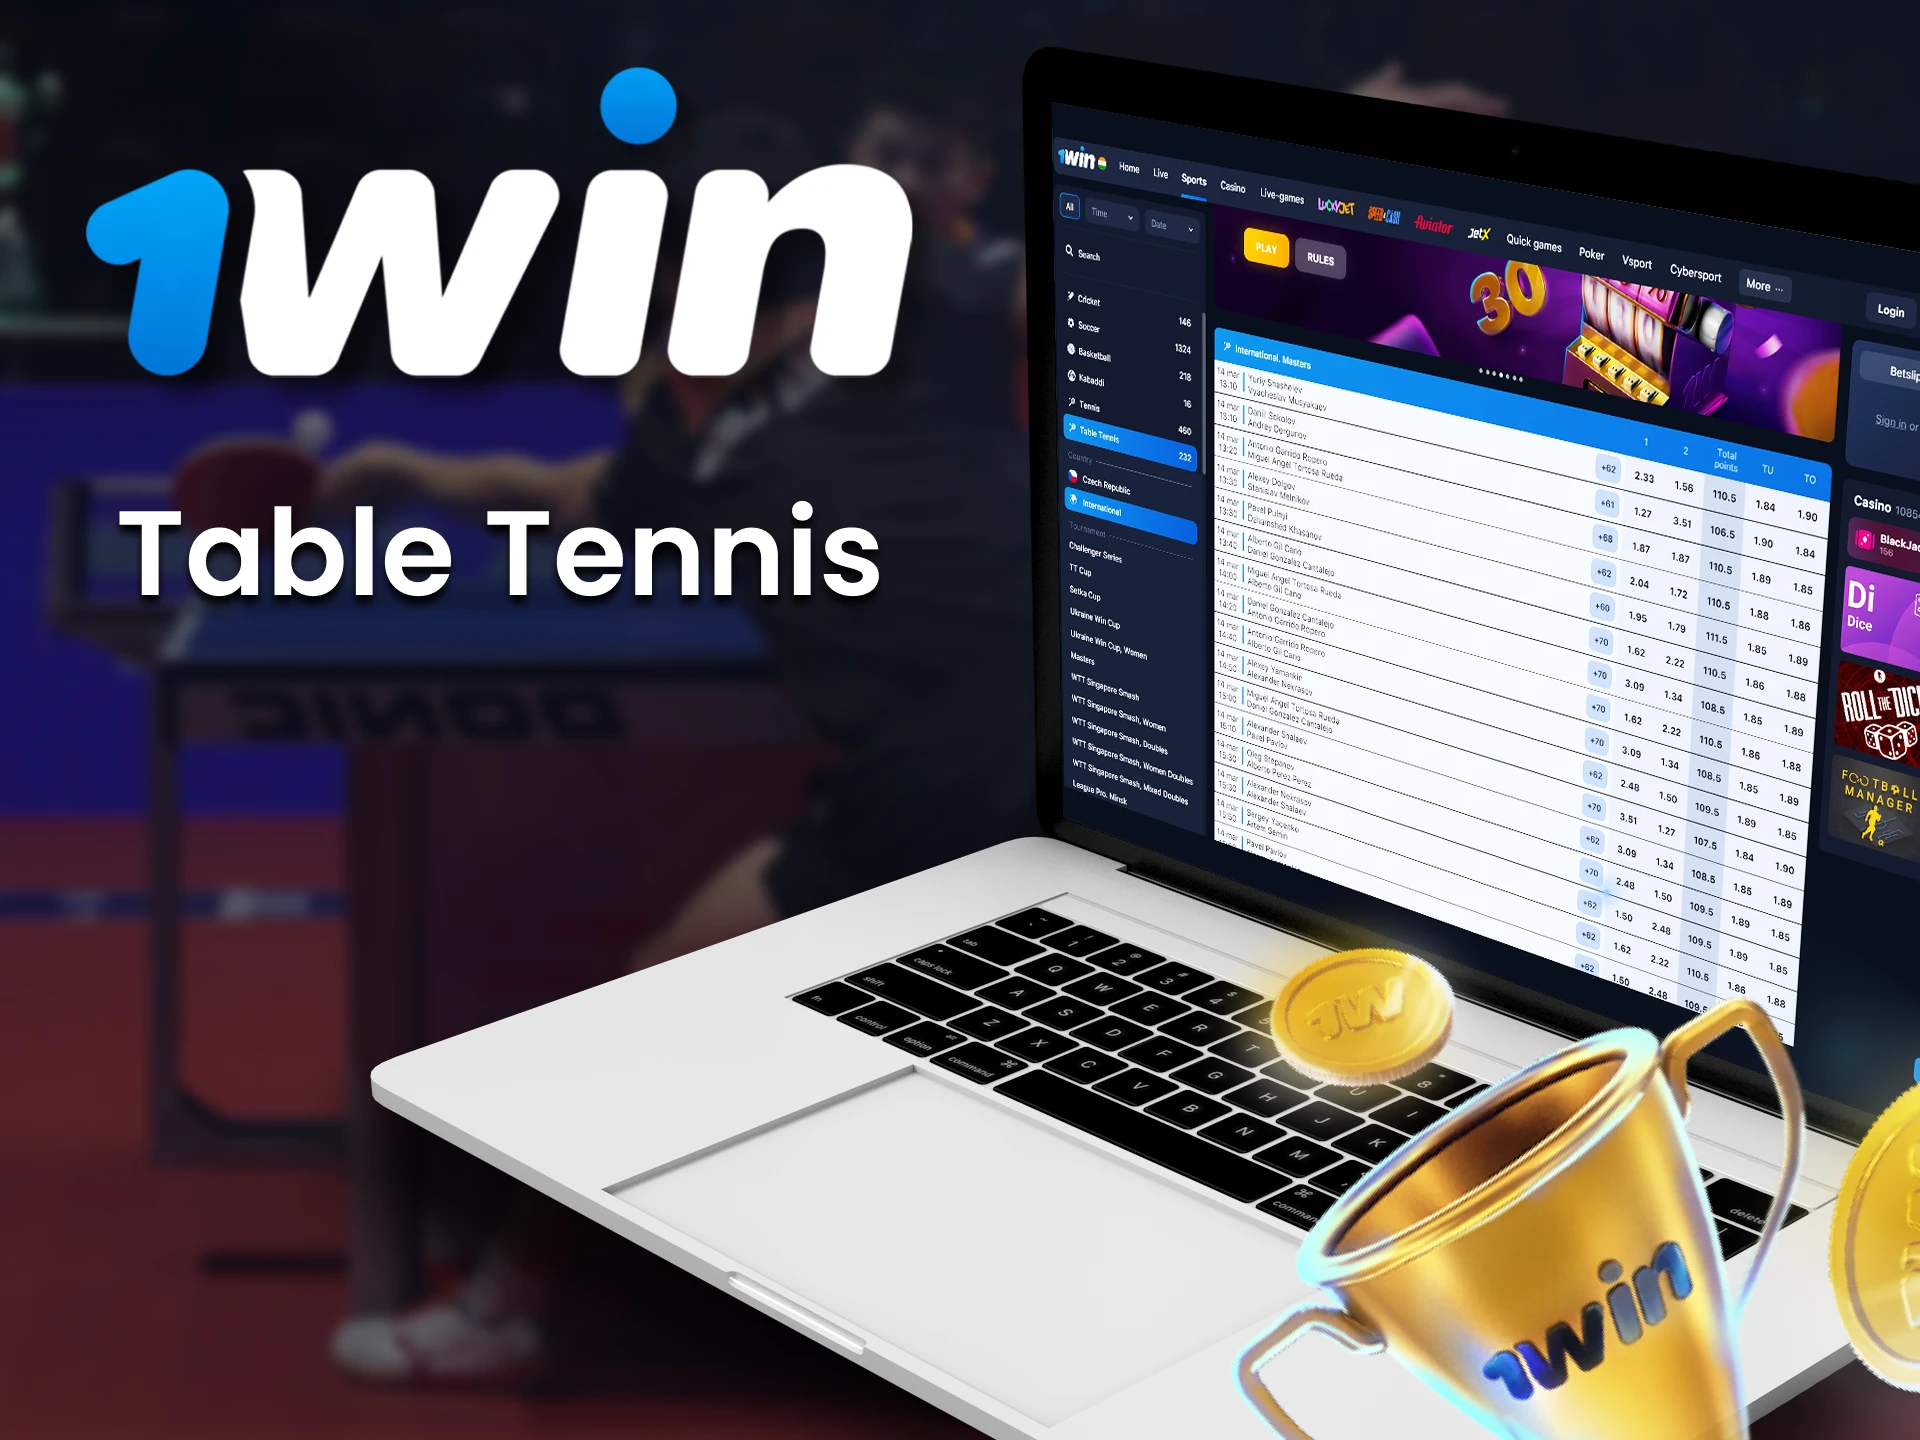 At 1win, place your bet on table tennis.